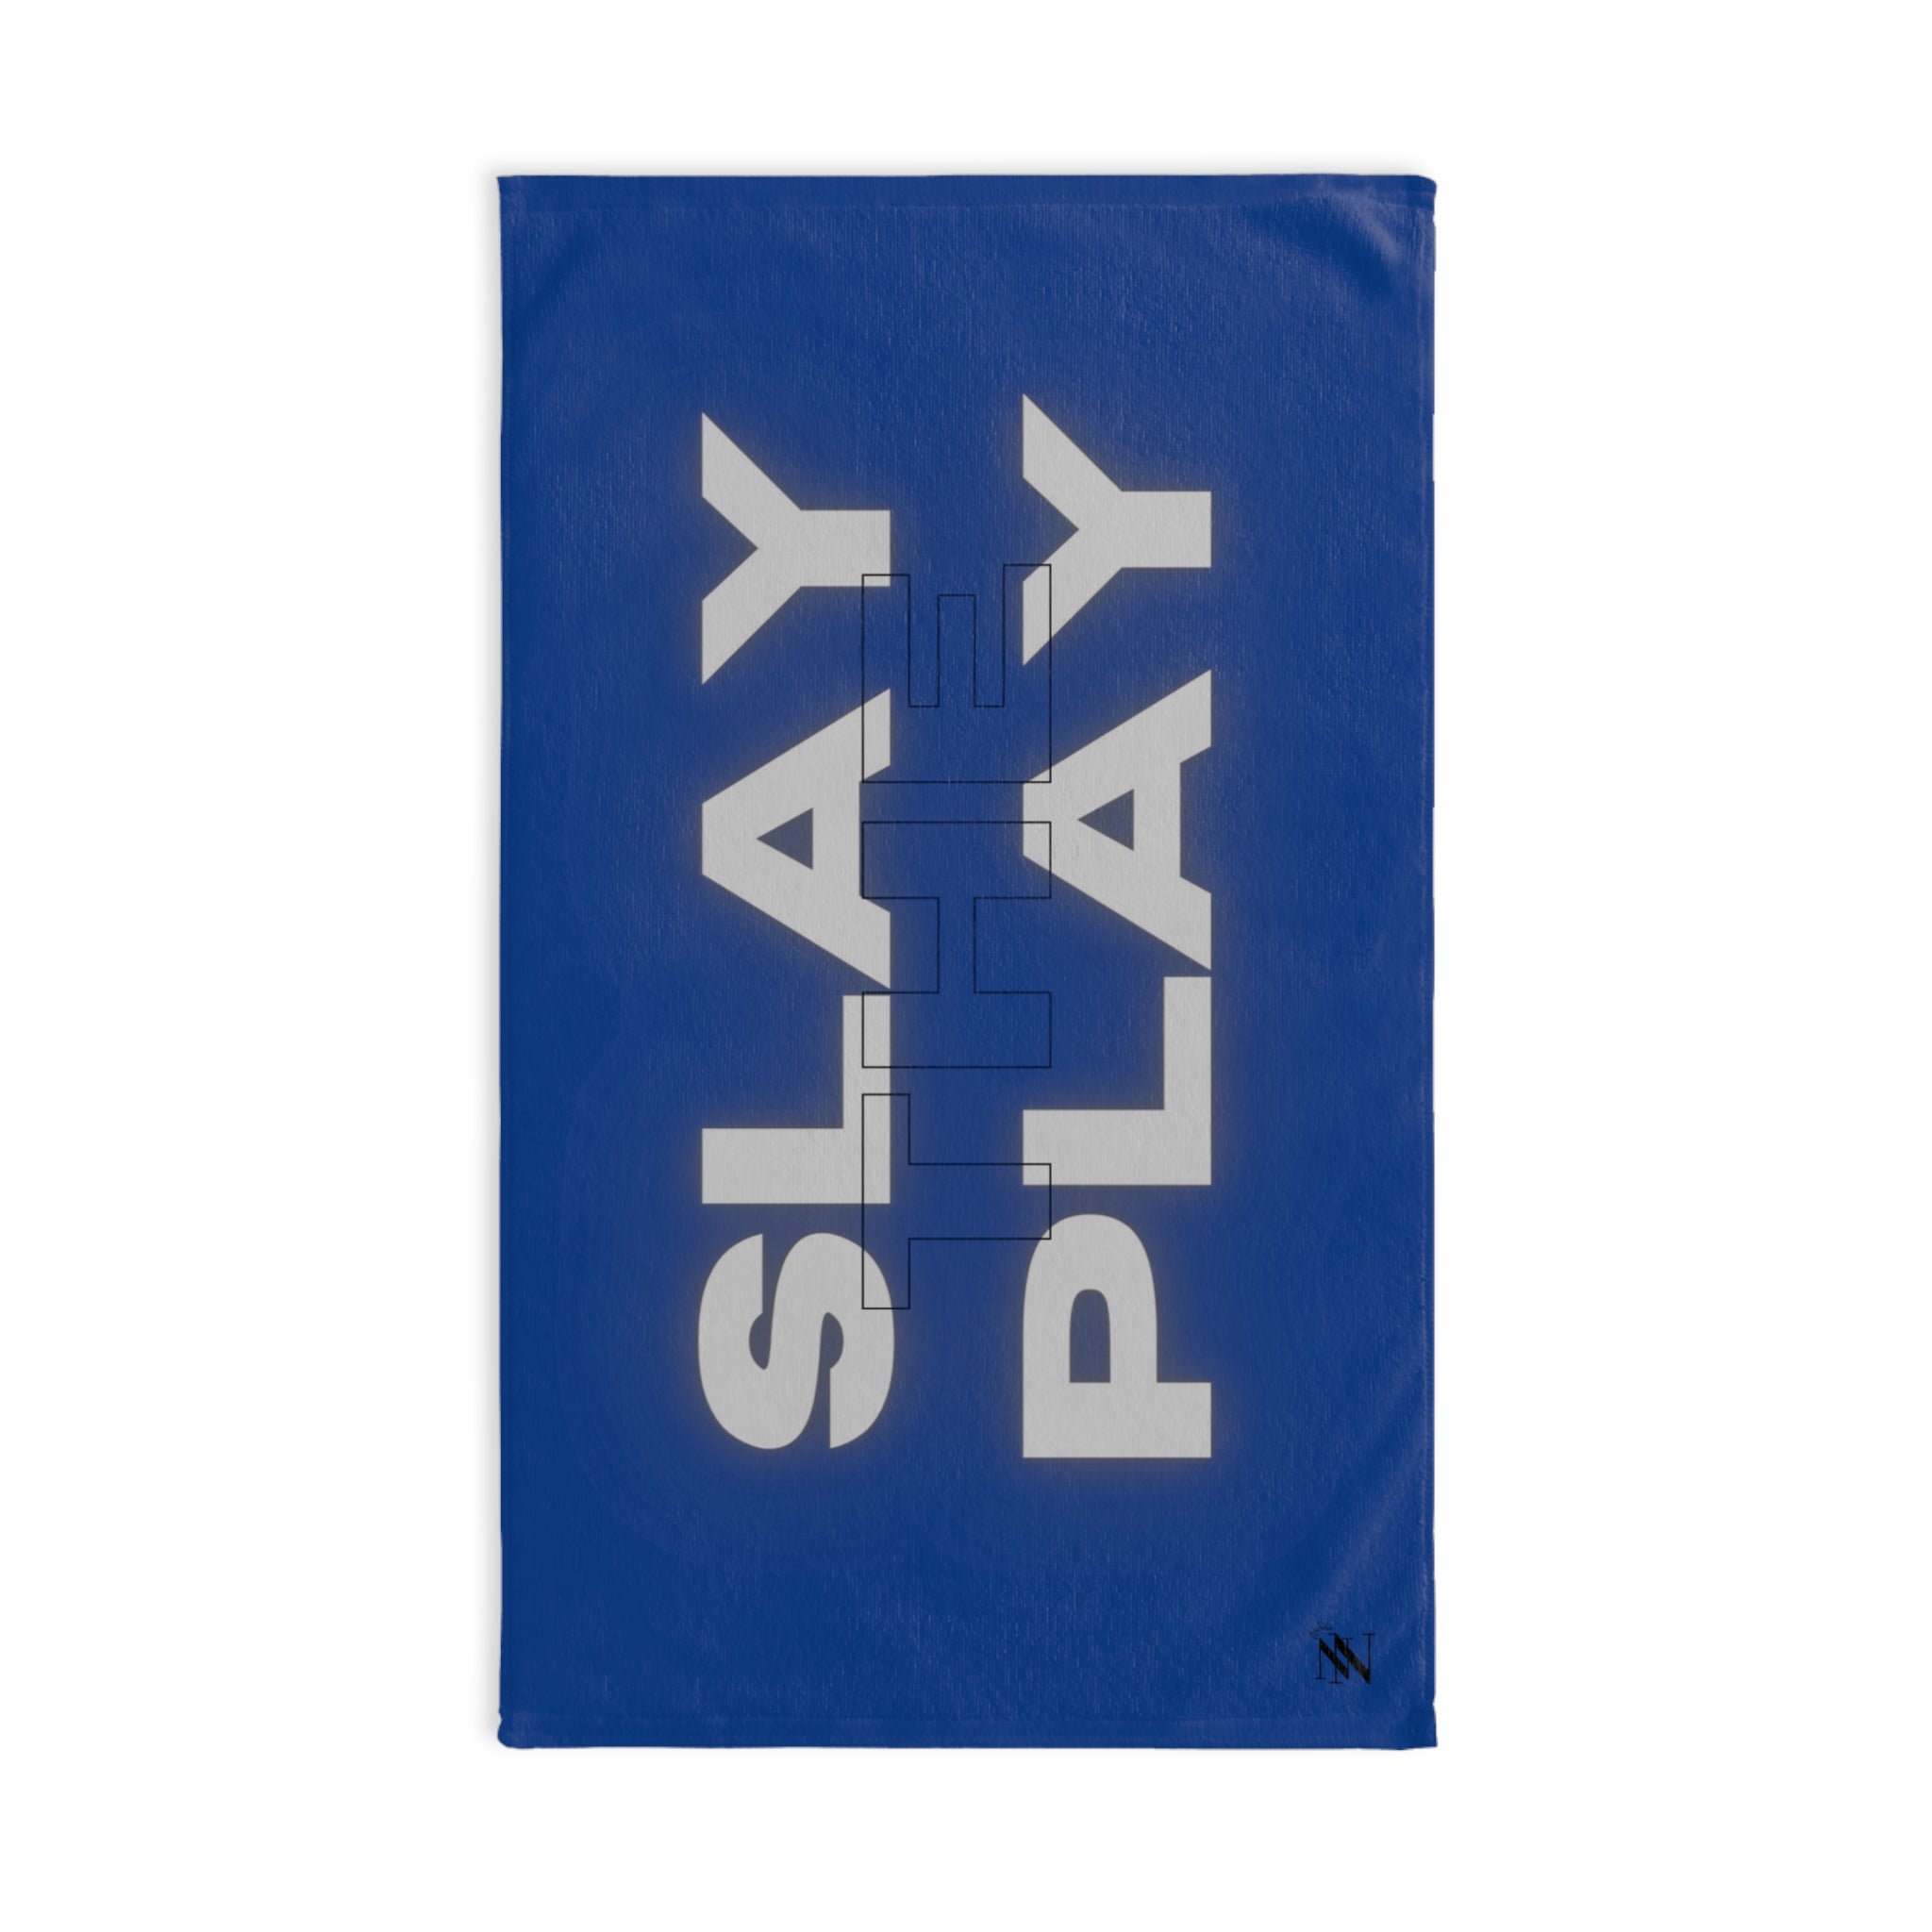 Slay Play Fit Blue | Gifts for Boyfriend, Funny Towel Romantic Gift for Wedding Couple Fiance First Year Anniversary Valentines, Party Gag Gifts, Joke Humor Cloth for Husband Men BF NECTAR NAPKINS